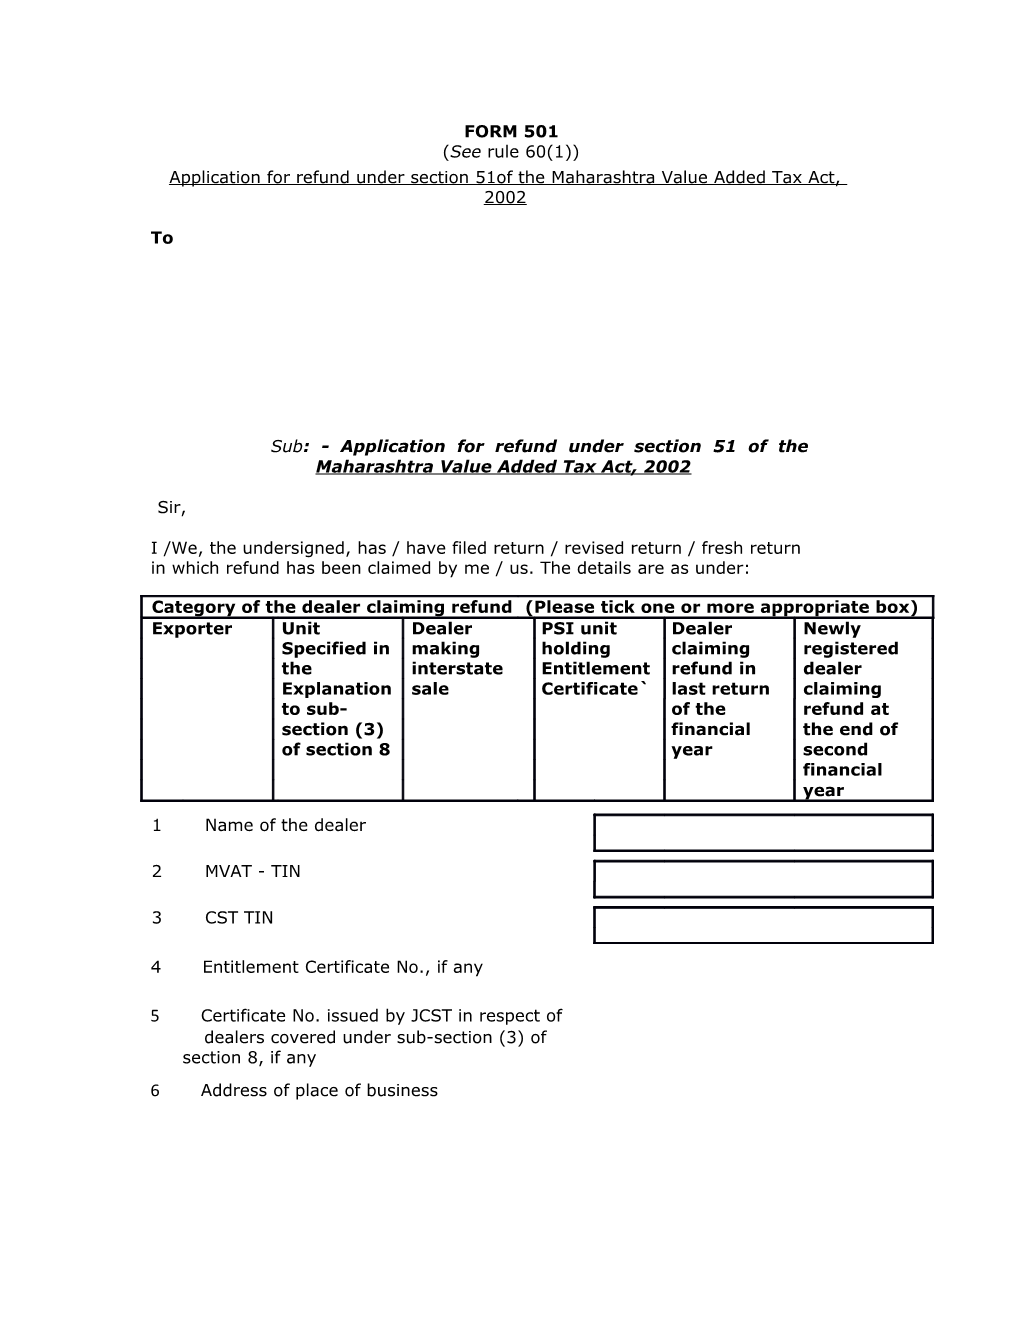 Application for Refund Under Section 51Of the Maharashtra Value Added Tax Act, 2002